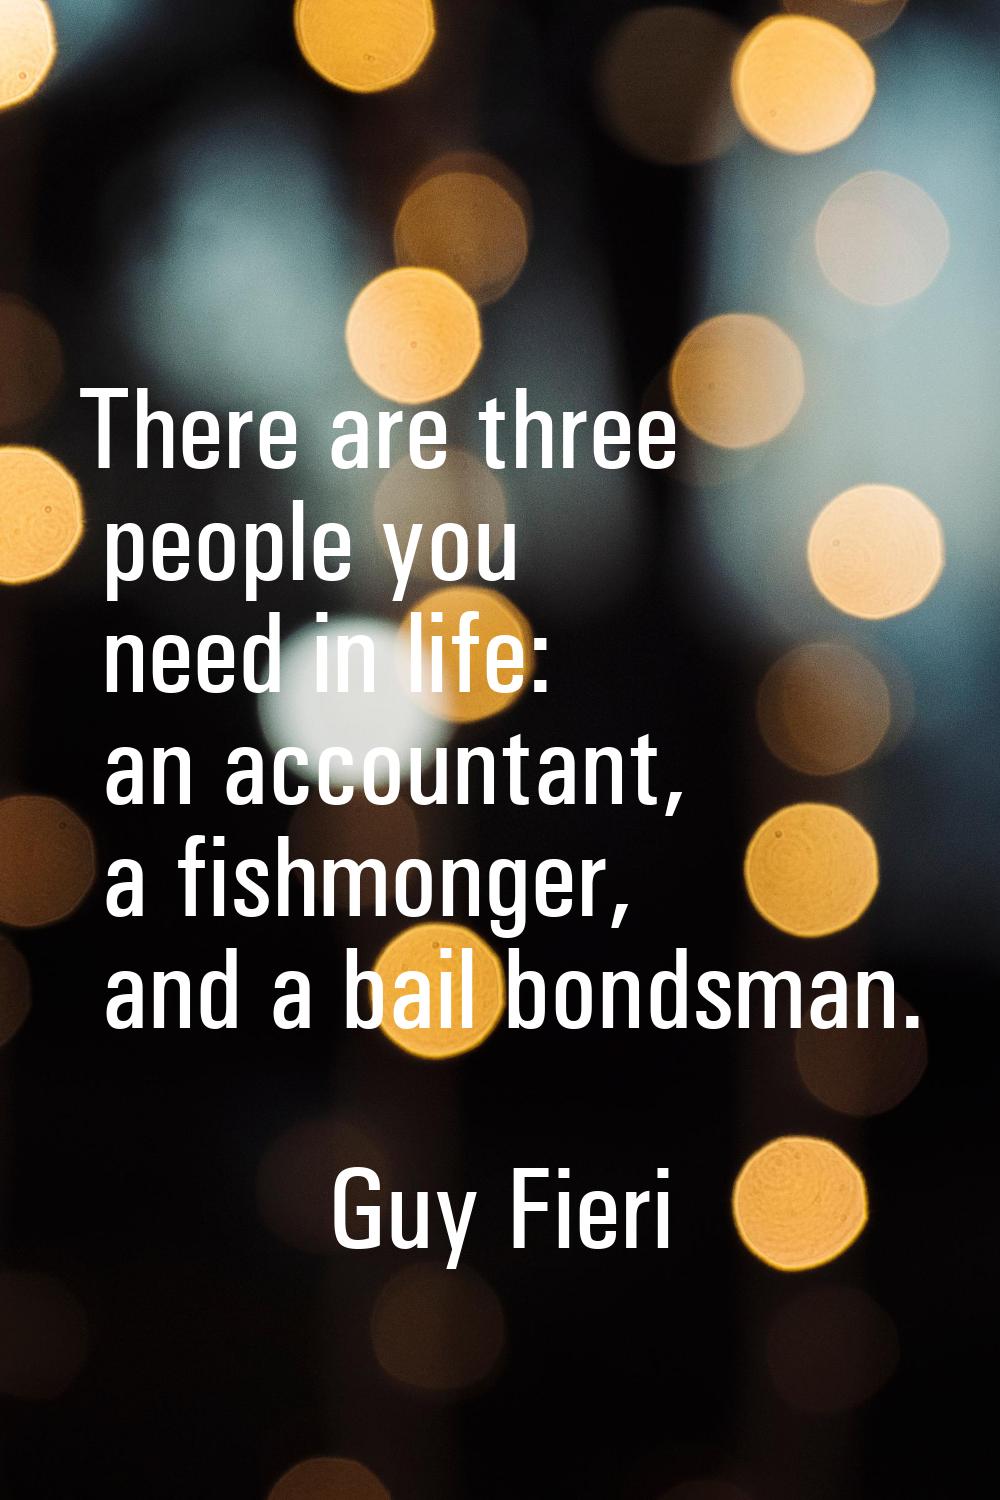 There are three people you need in life: an accountant, a fishmonger, and a bail bondsman.